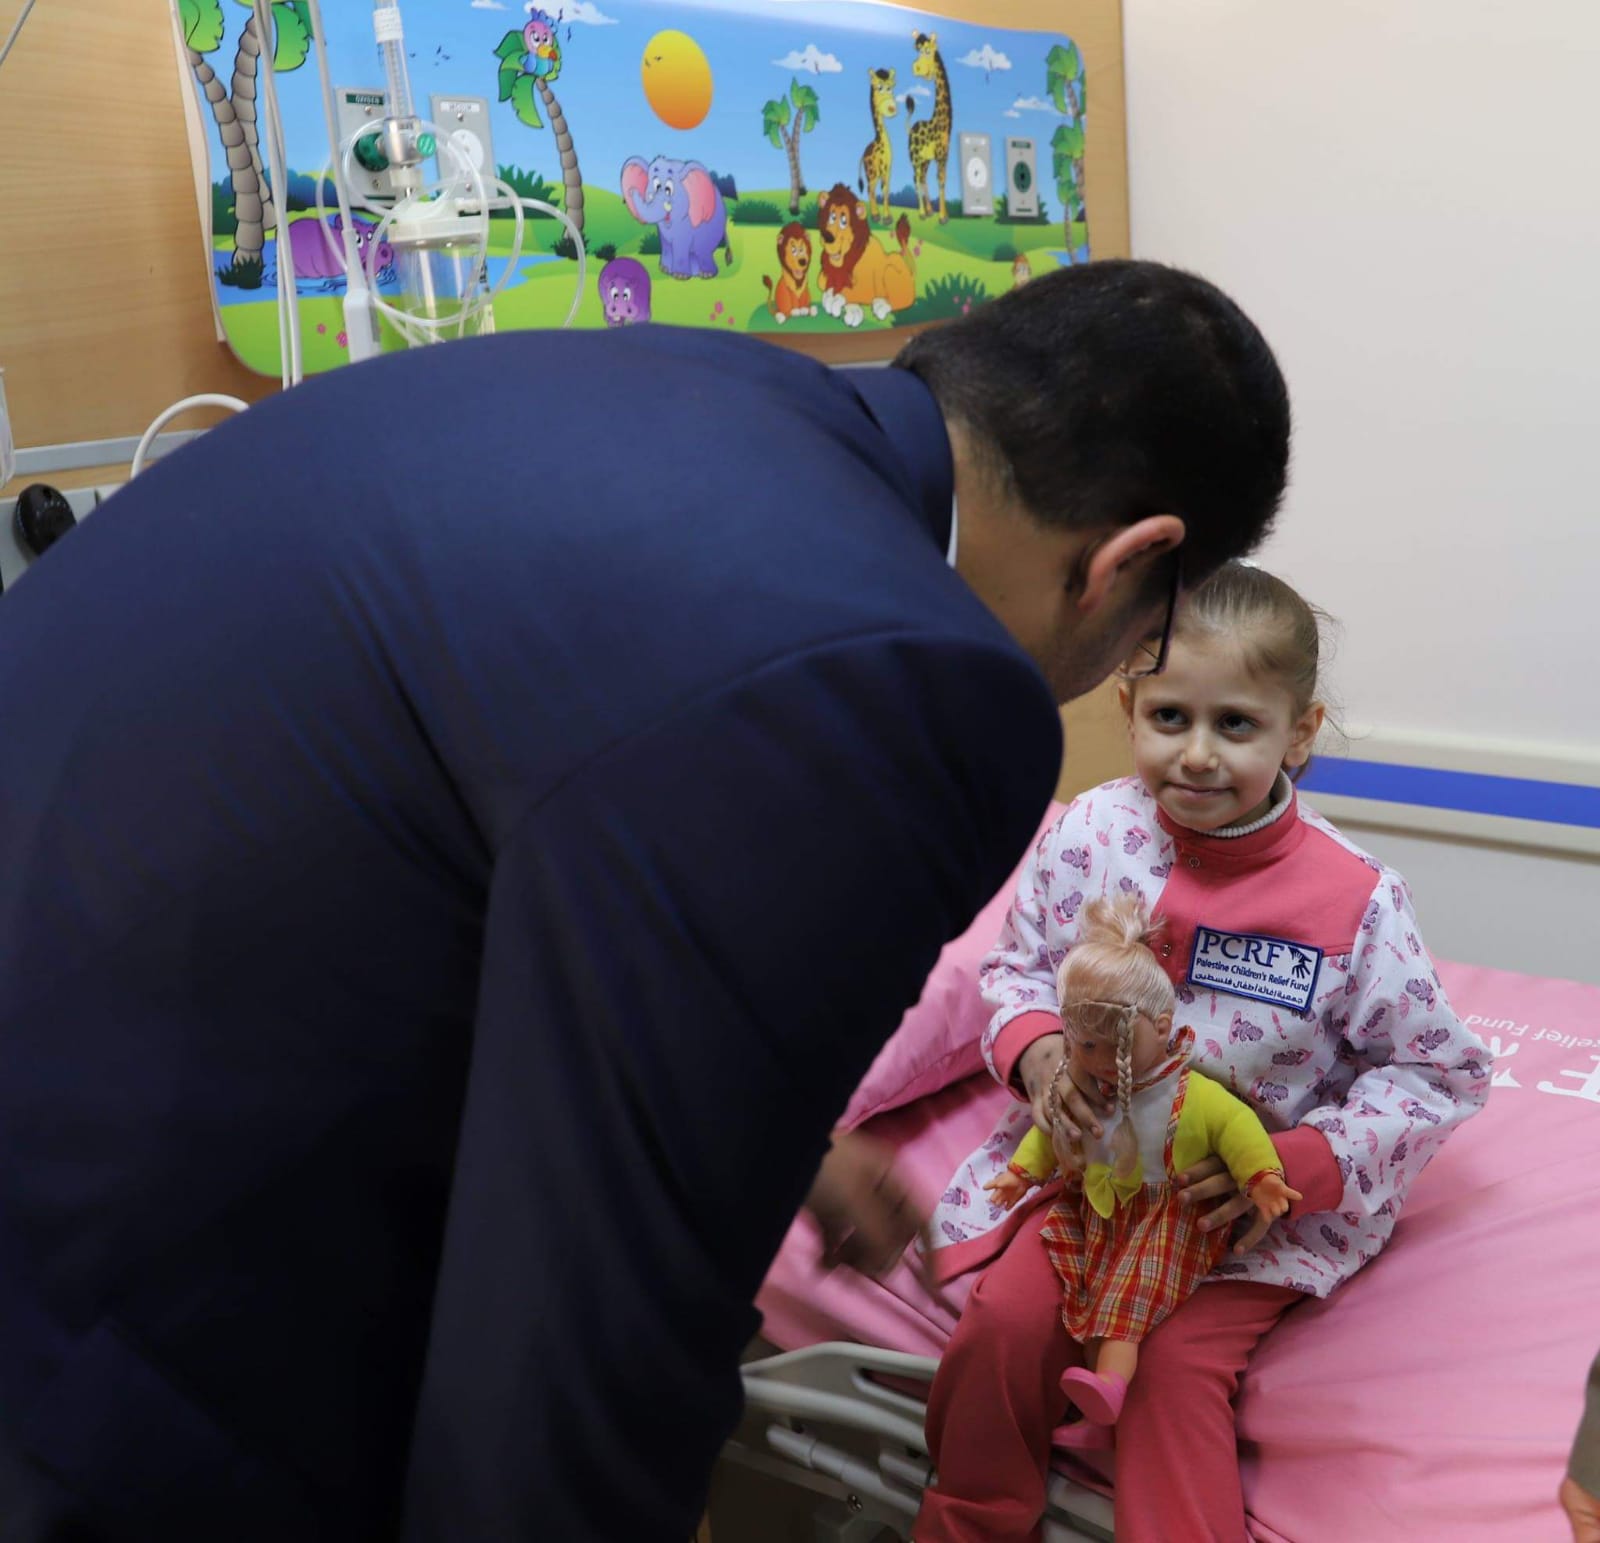 Inauguration of Cancer Ward in Gaza donated by US Charity